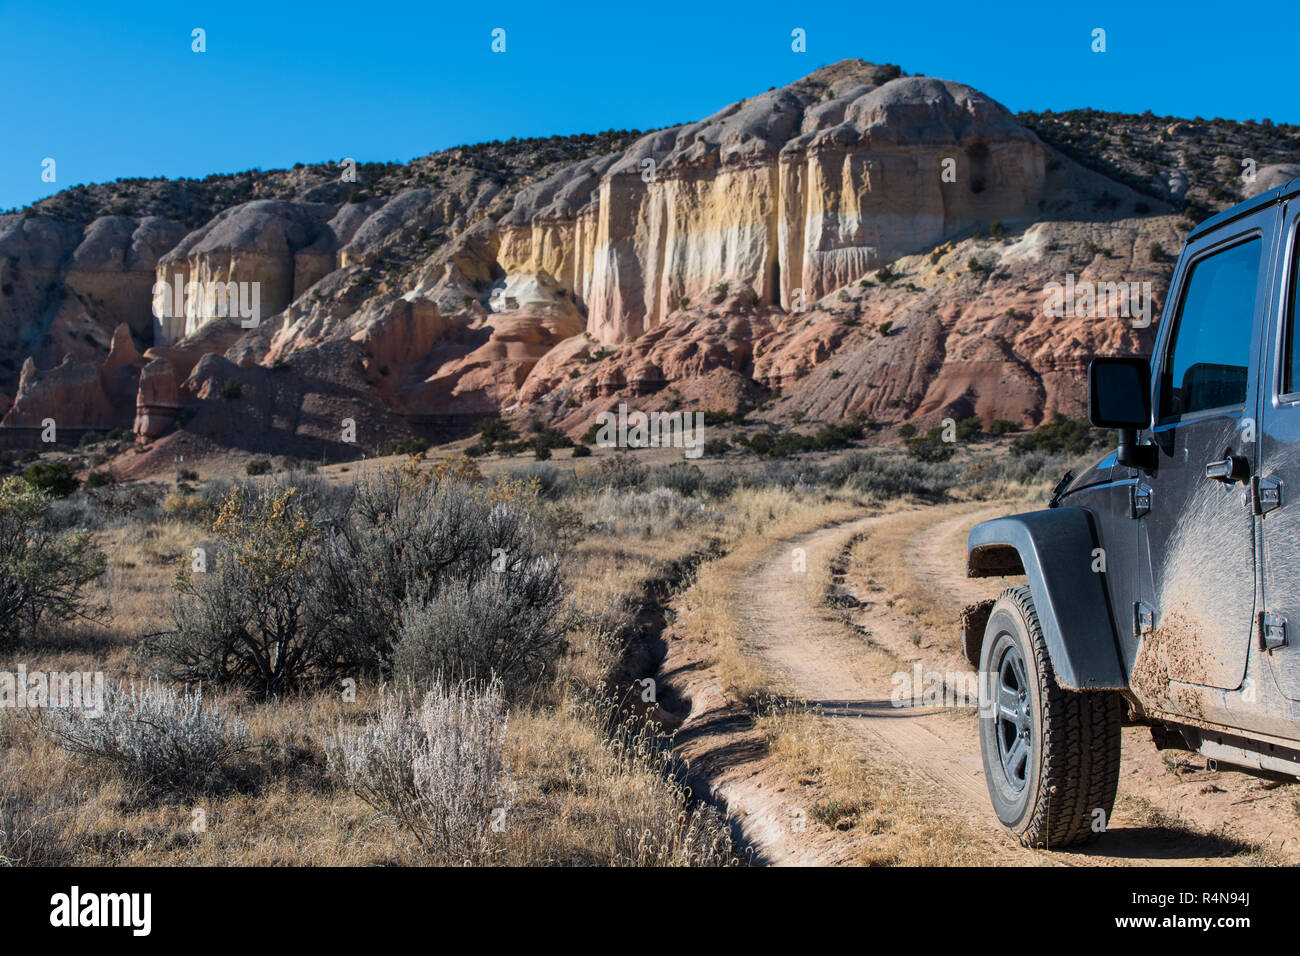 Muddy four-wheel drive vehicle on dirt road heading toward a colorful mesa in the desert landscape in the Rio Chama canyon near Santa Fe, New Mexico Stock Photo